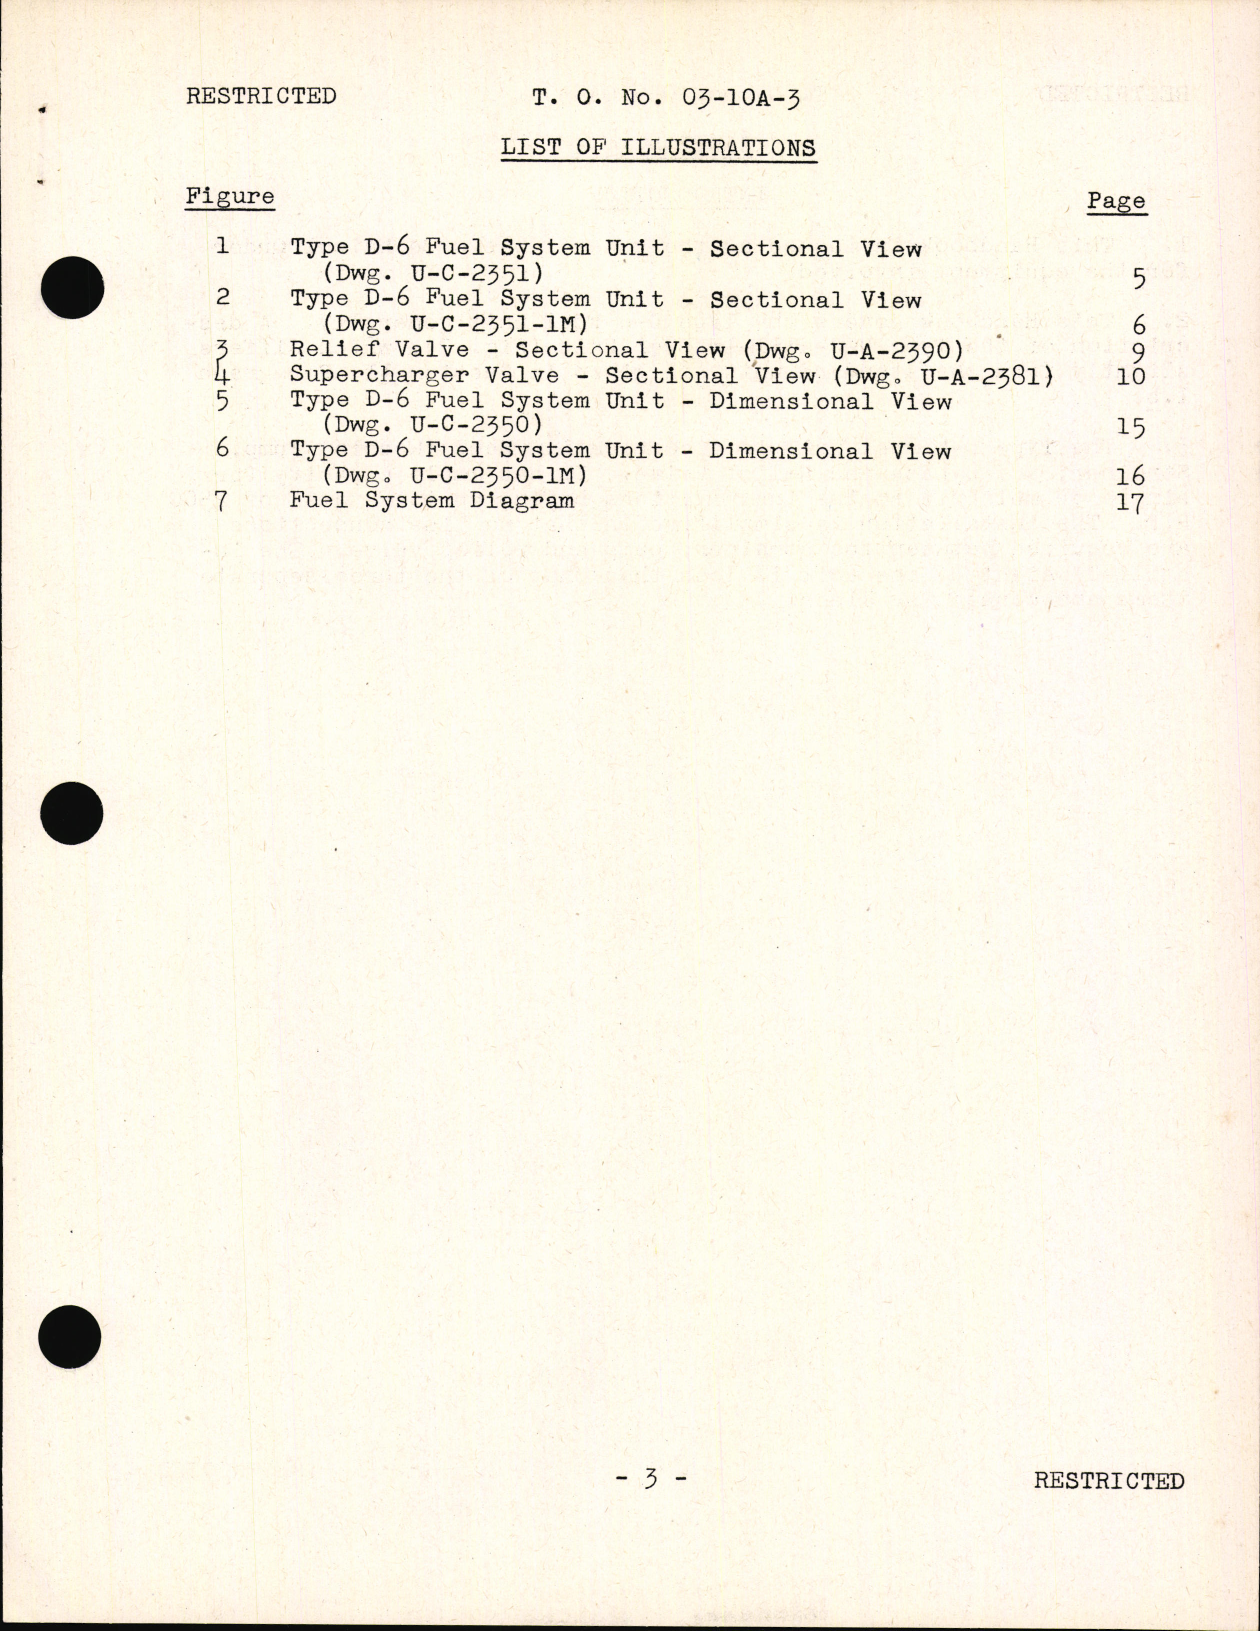 Sample page 5 from AirCorps Library document: Preliminary Handbook of Instructions with Parts Catalog for Type D-6 Fuel System Unit